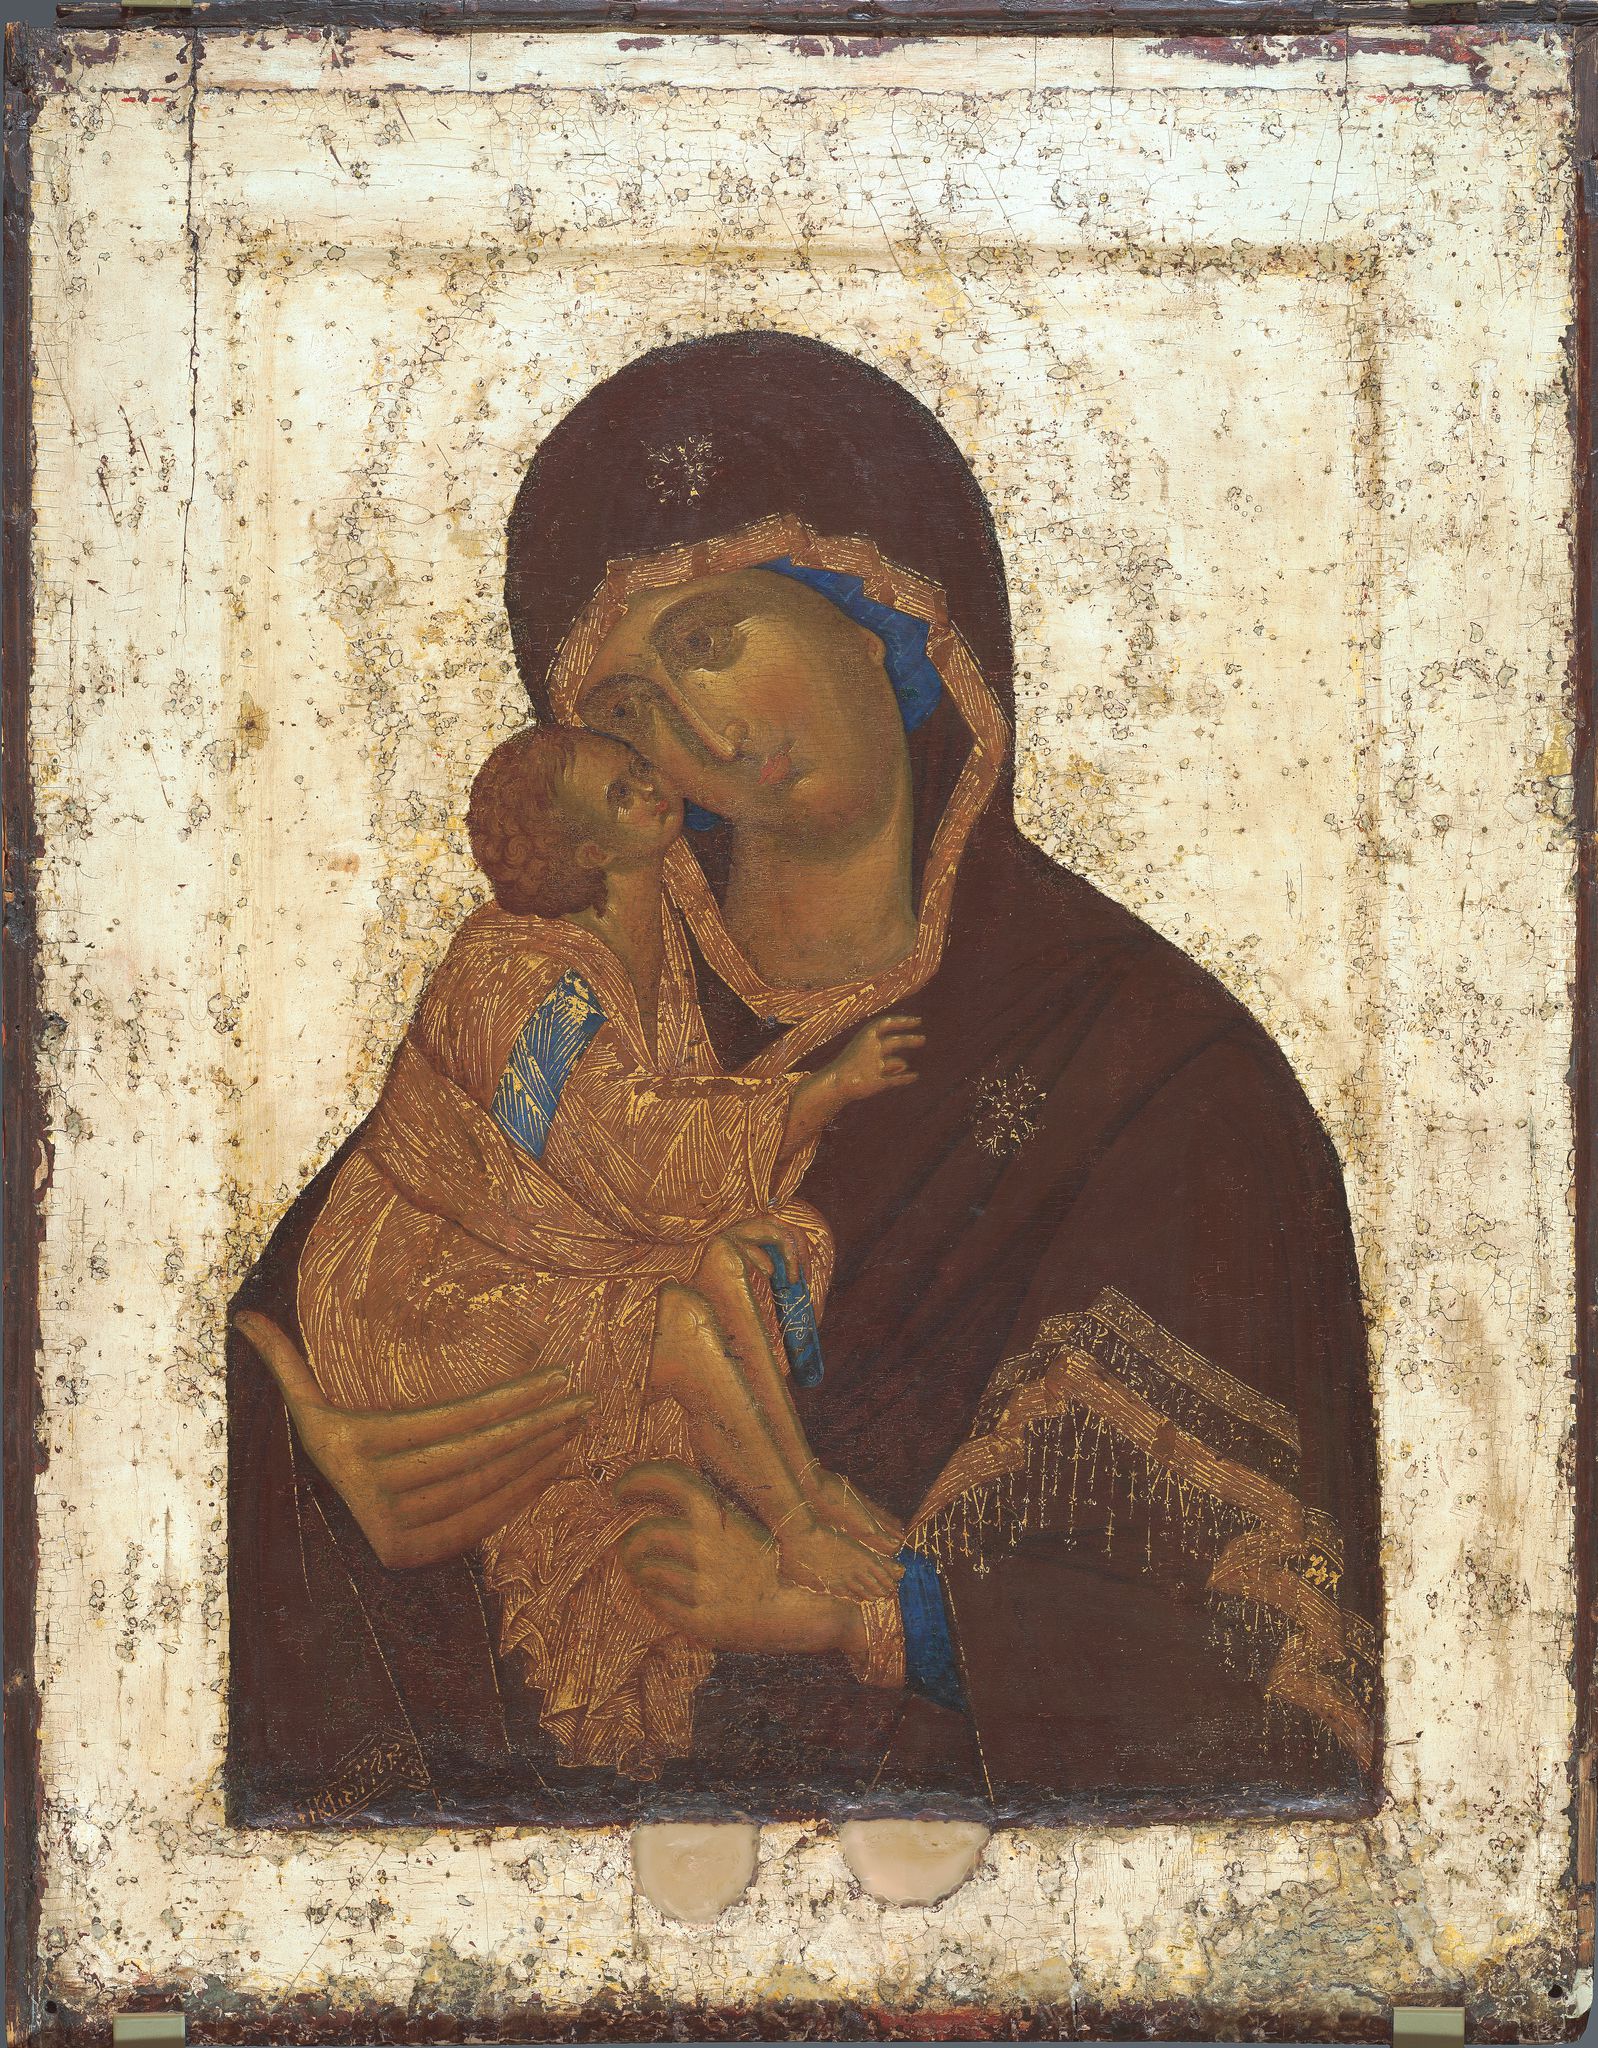 How to read and comprehend a Russian icon